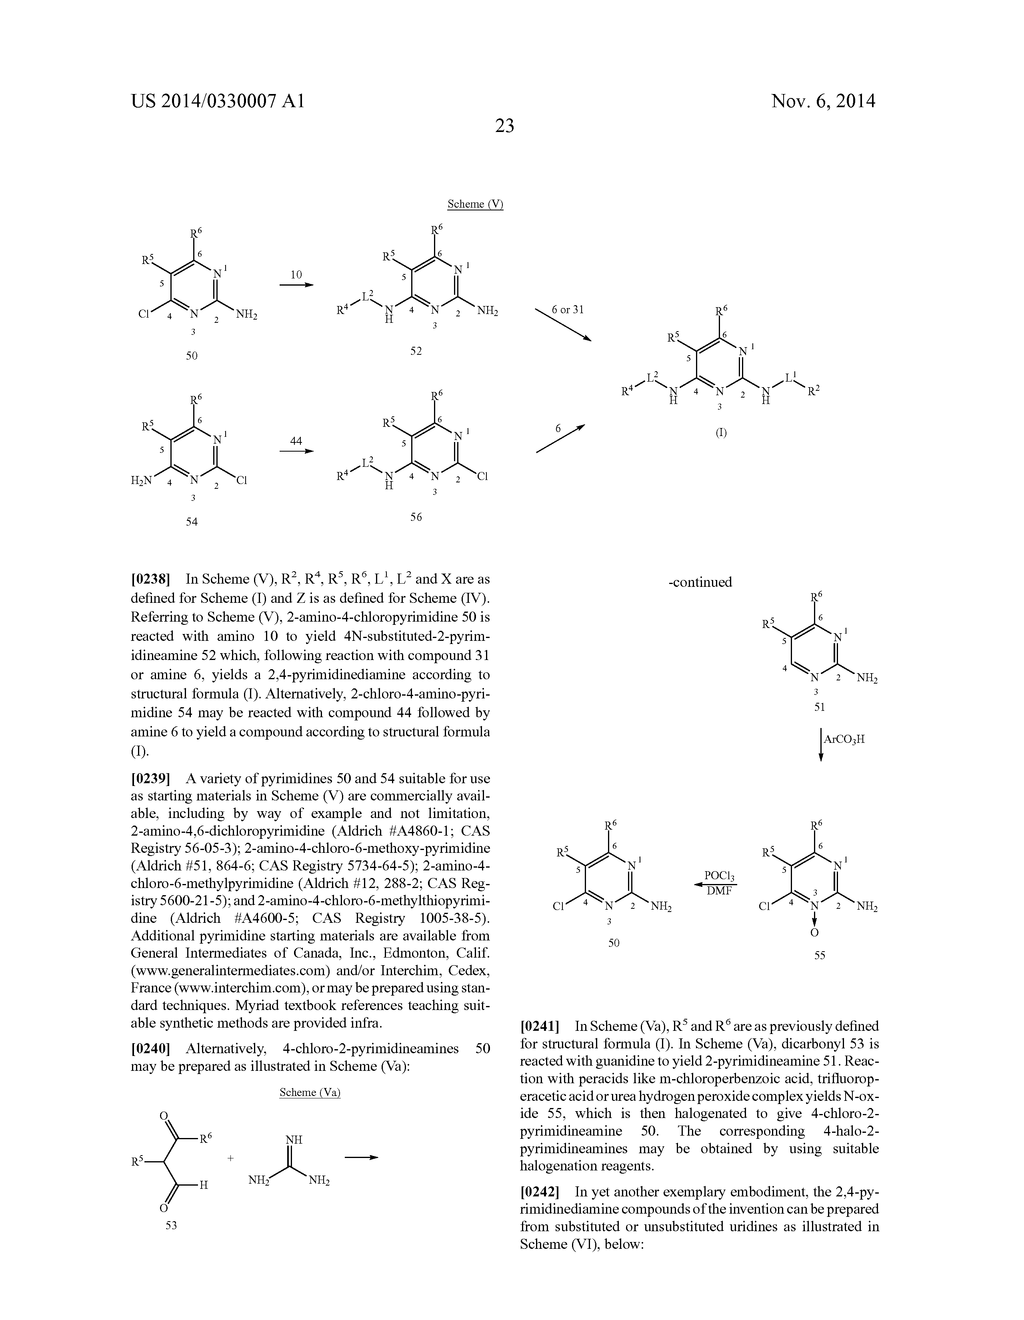 2,4-PYRIMIDINEDIAMINE COMPOUNDS AND THEIR USES - diagram, schematic, and image 38